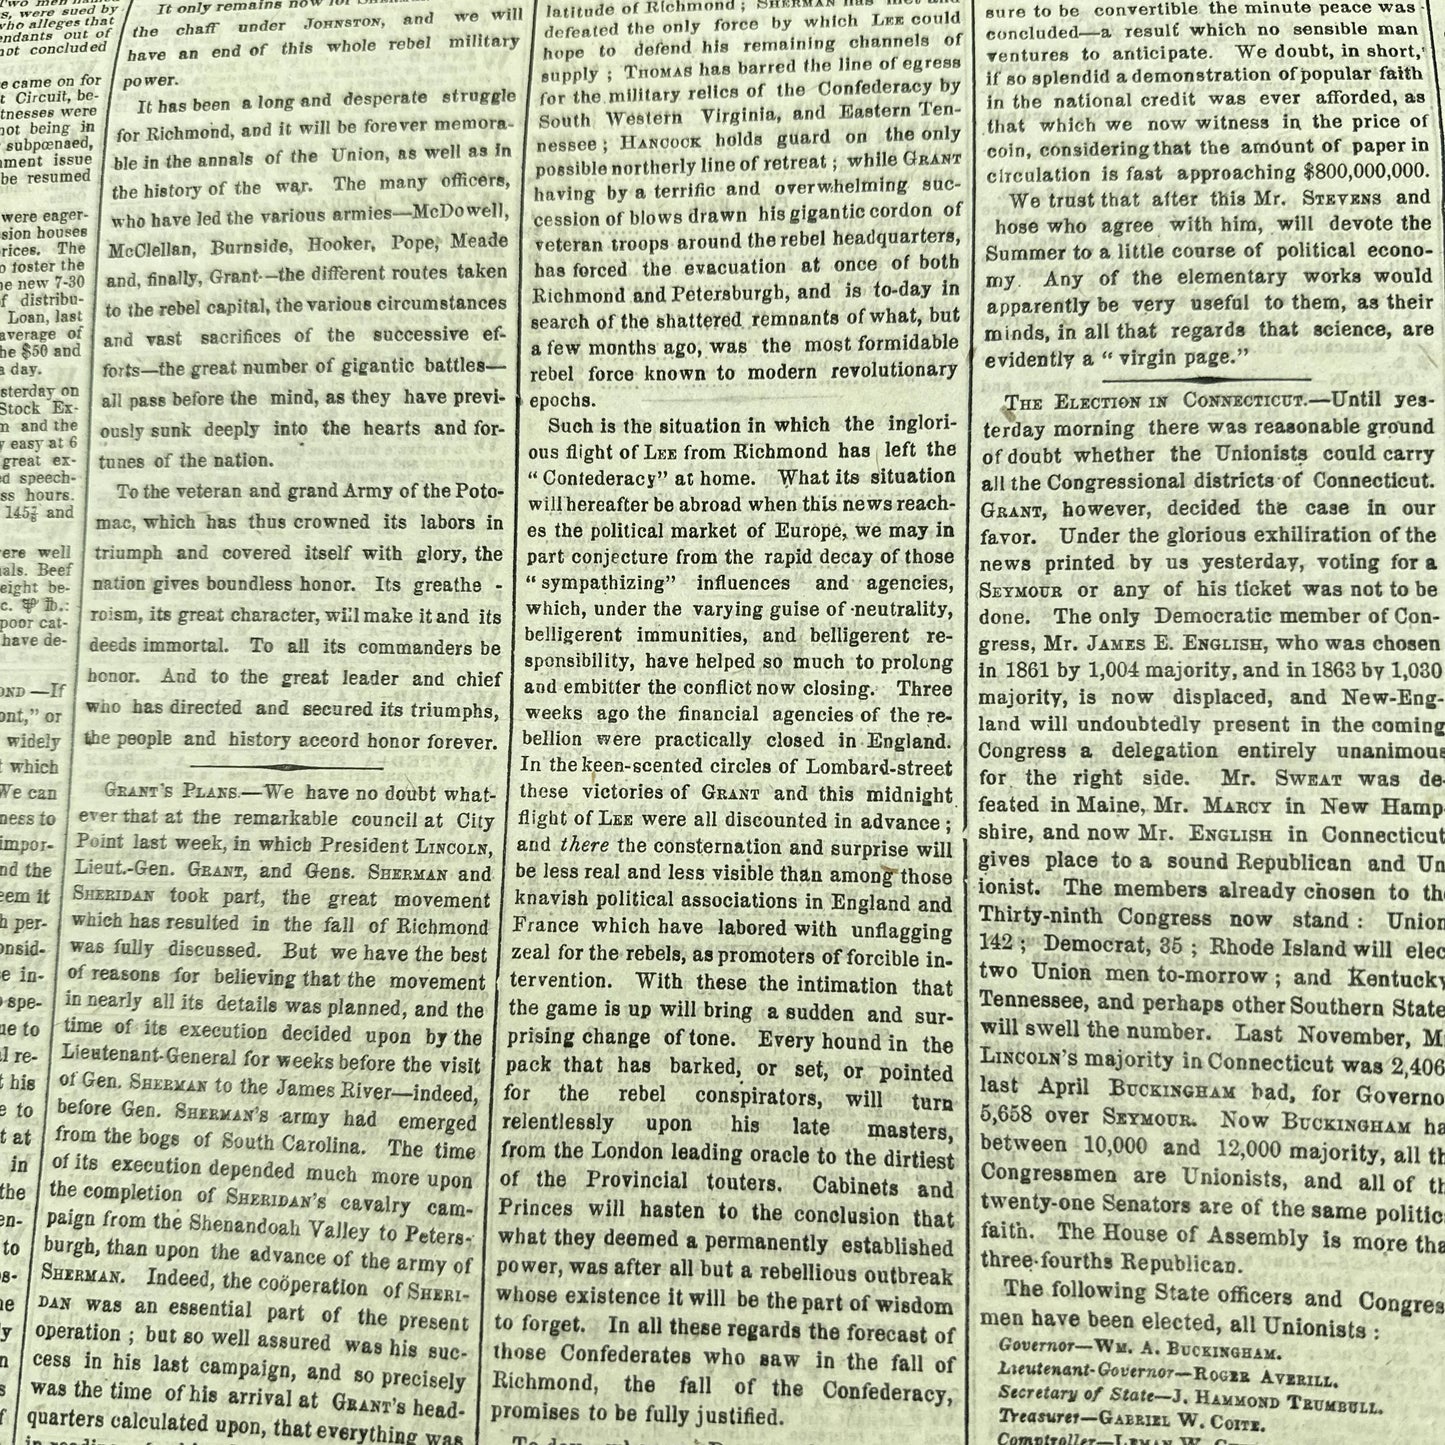 "The New-York Times" reporting on General Grant and the Fall of Richmond — New York, April 4, 1865